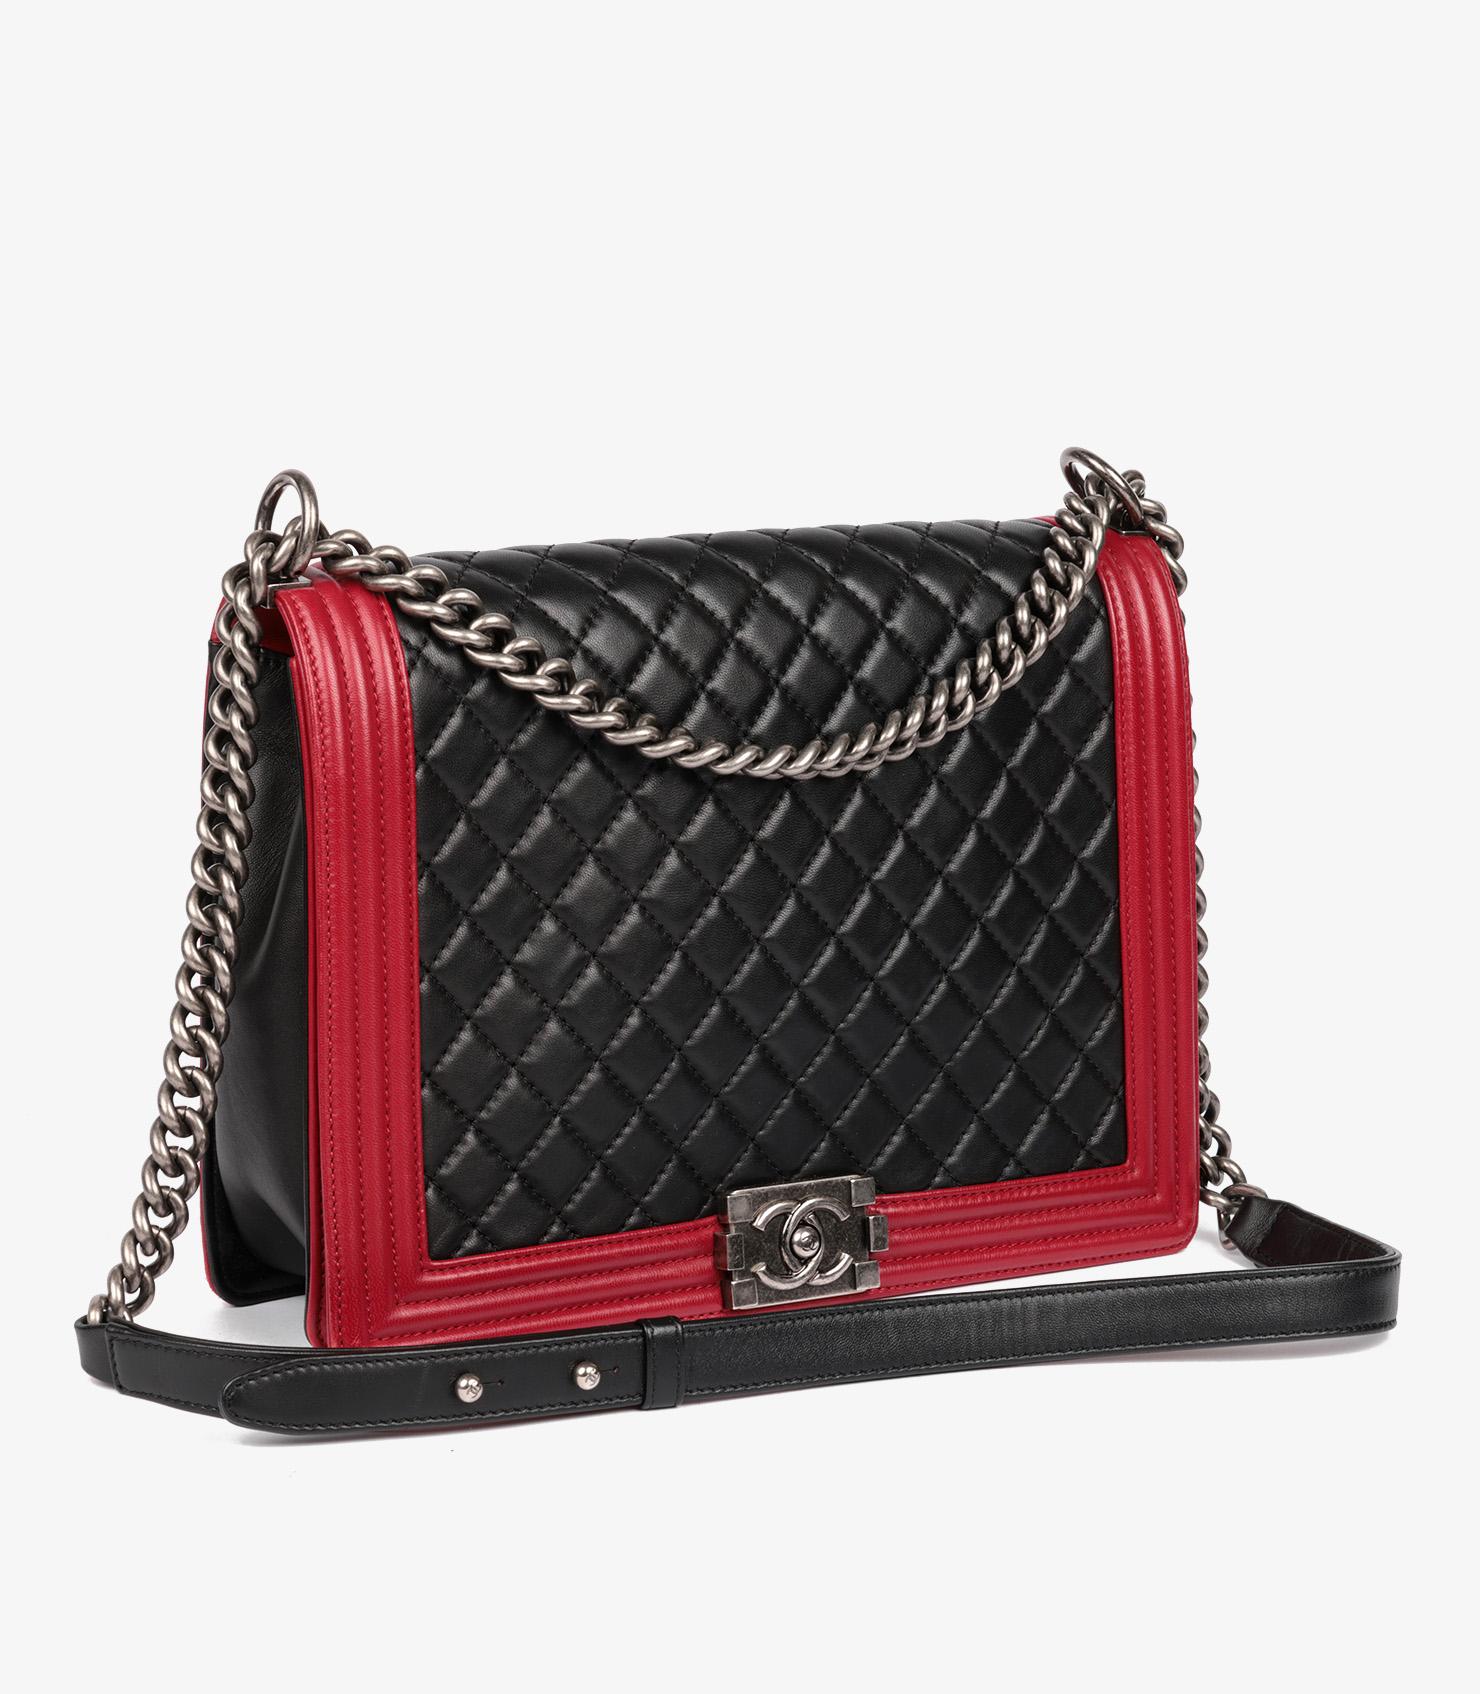 Chanel Black & Red Quilted Lambskin Large Le Boy

Brand- Chanel
Model- Large Le Boy
Product Type- Crossbody, Shoulder
Serial Number- 17******
Age- Circa 2012
Accompanied By- Chanel Dust Bag, Box, Authenticity Card, Care Booklet
Colour-